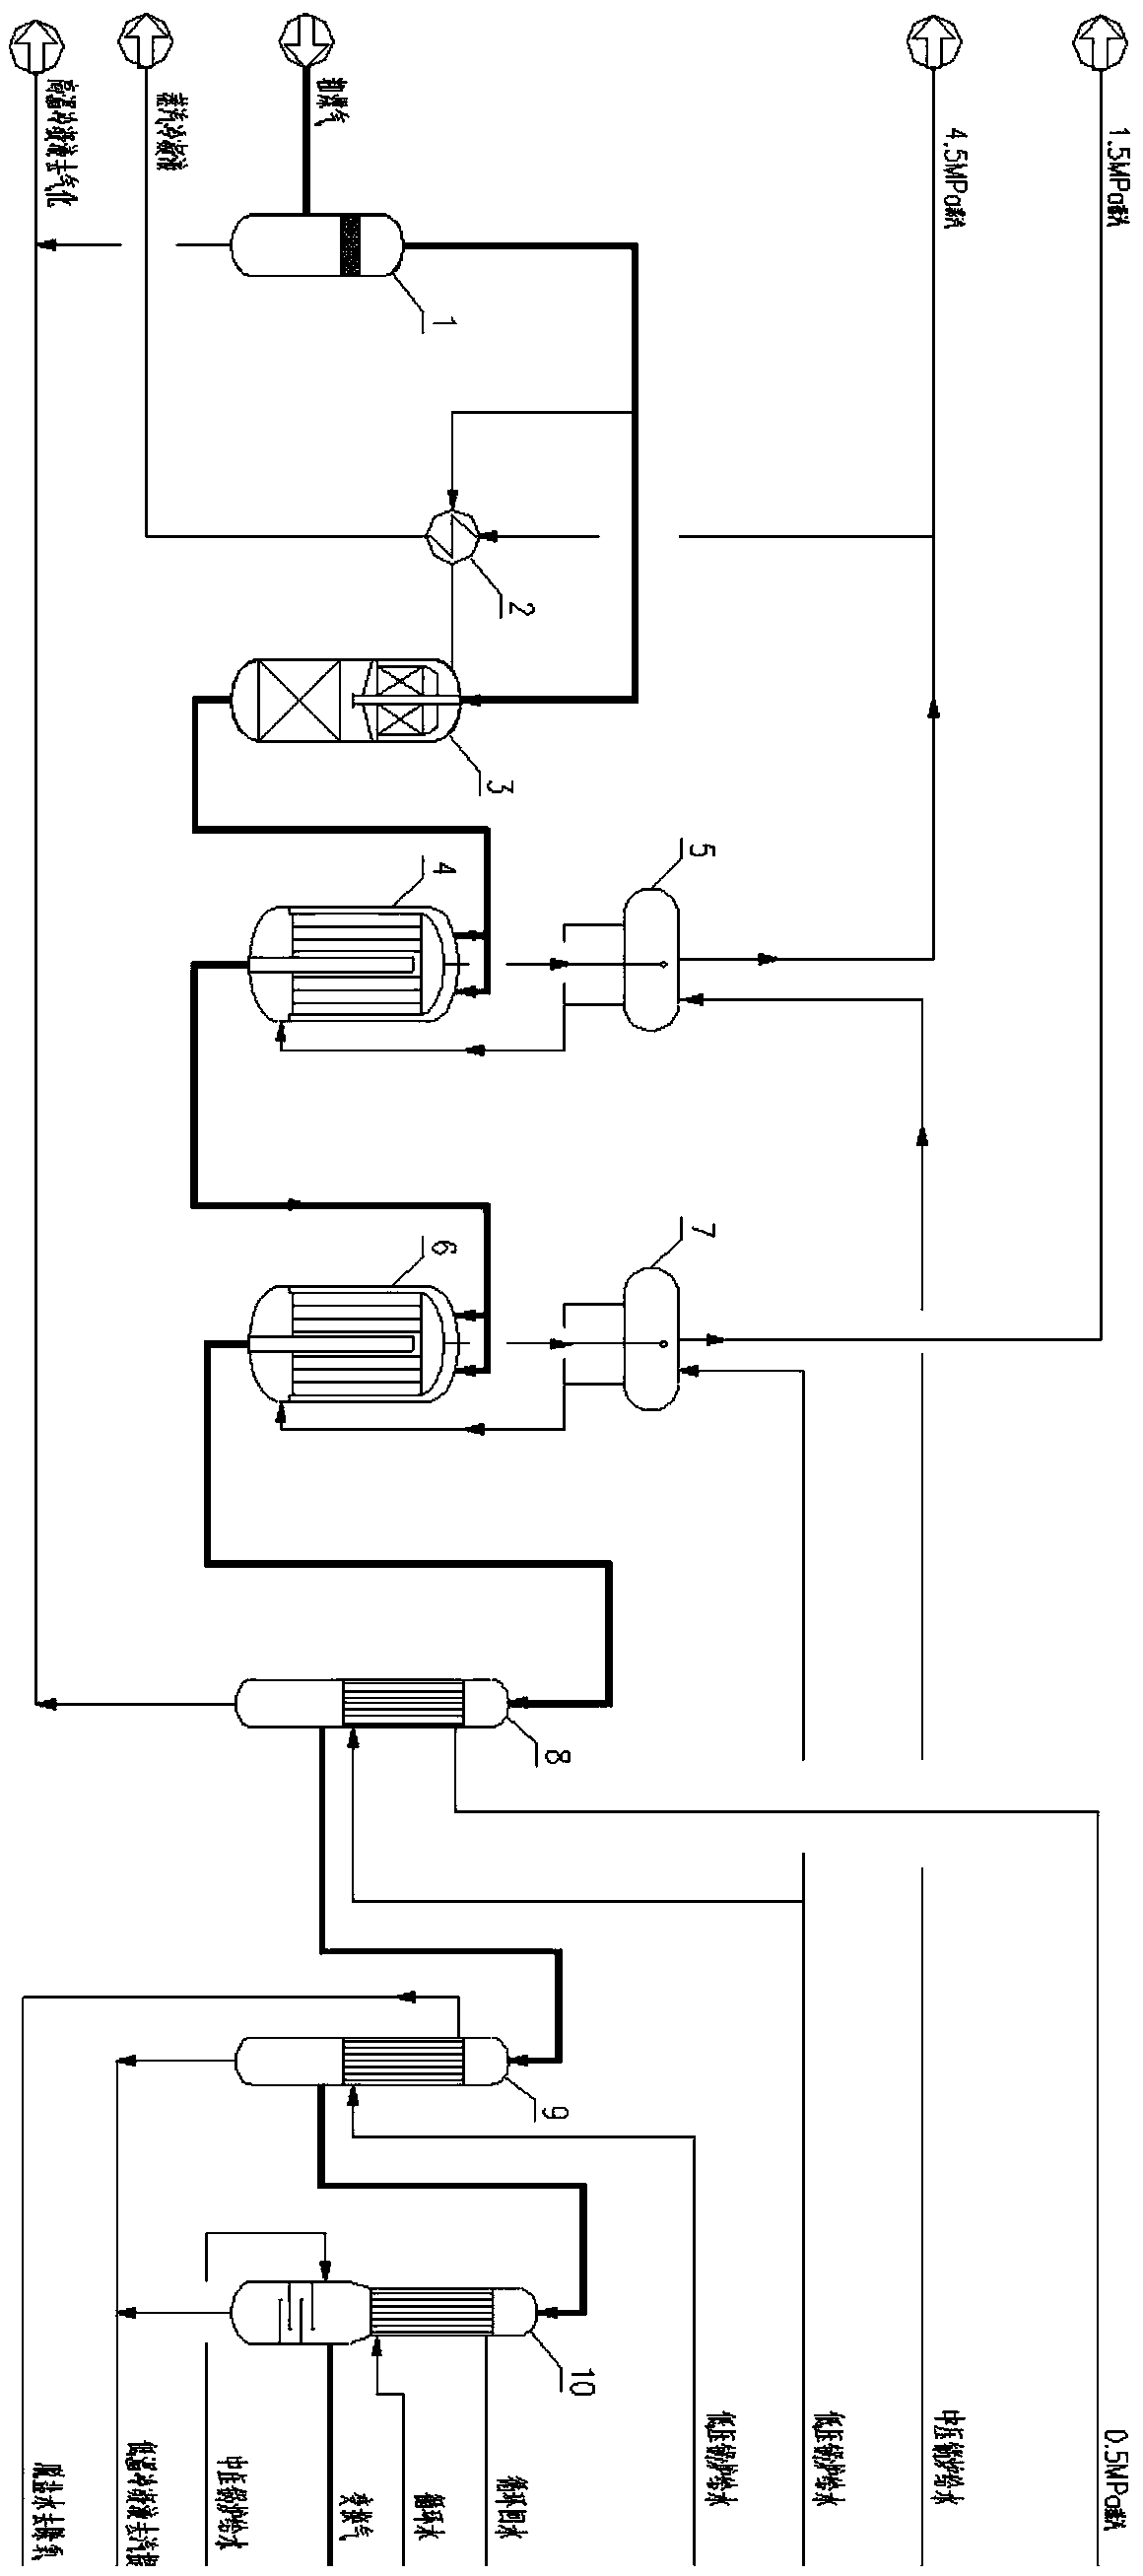 CO-containing raw gas conversion and heat recovery method